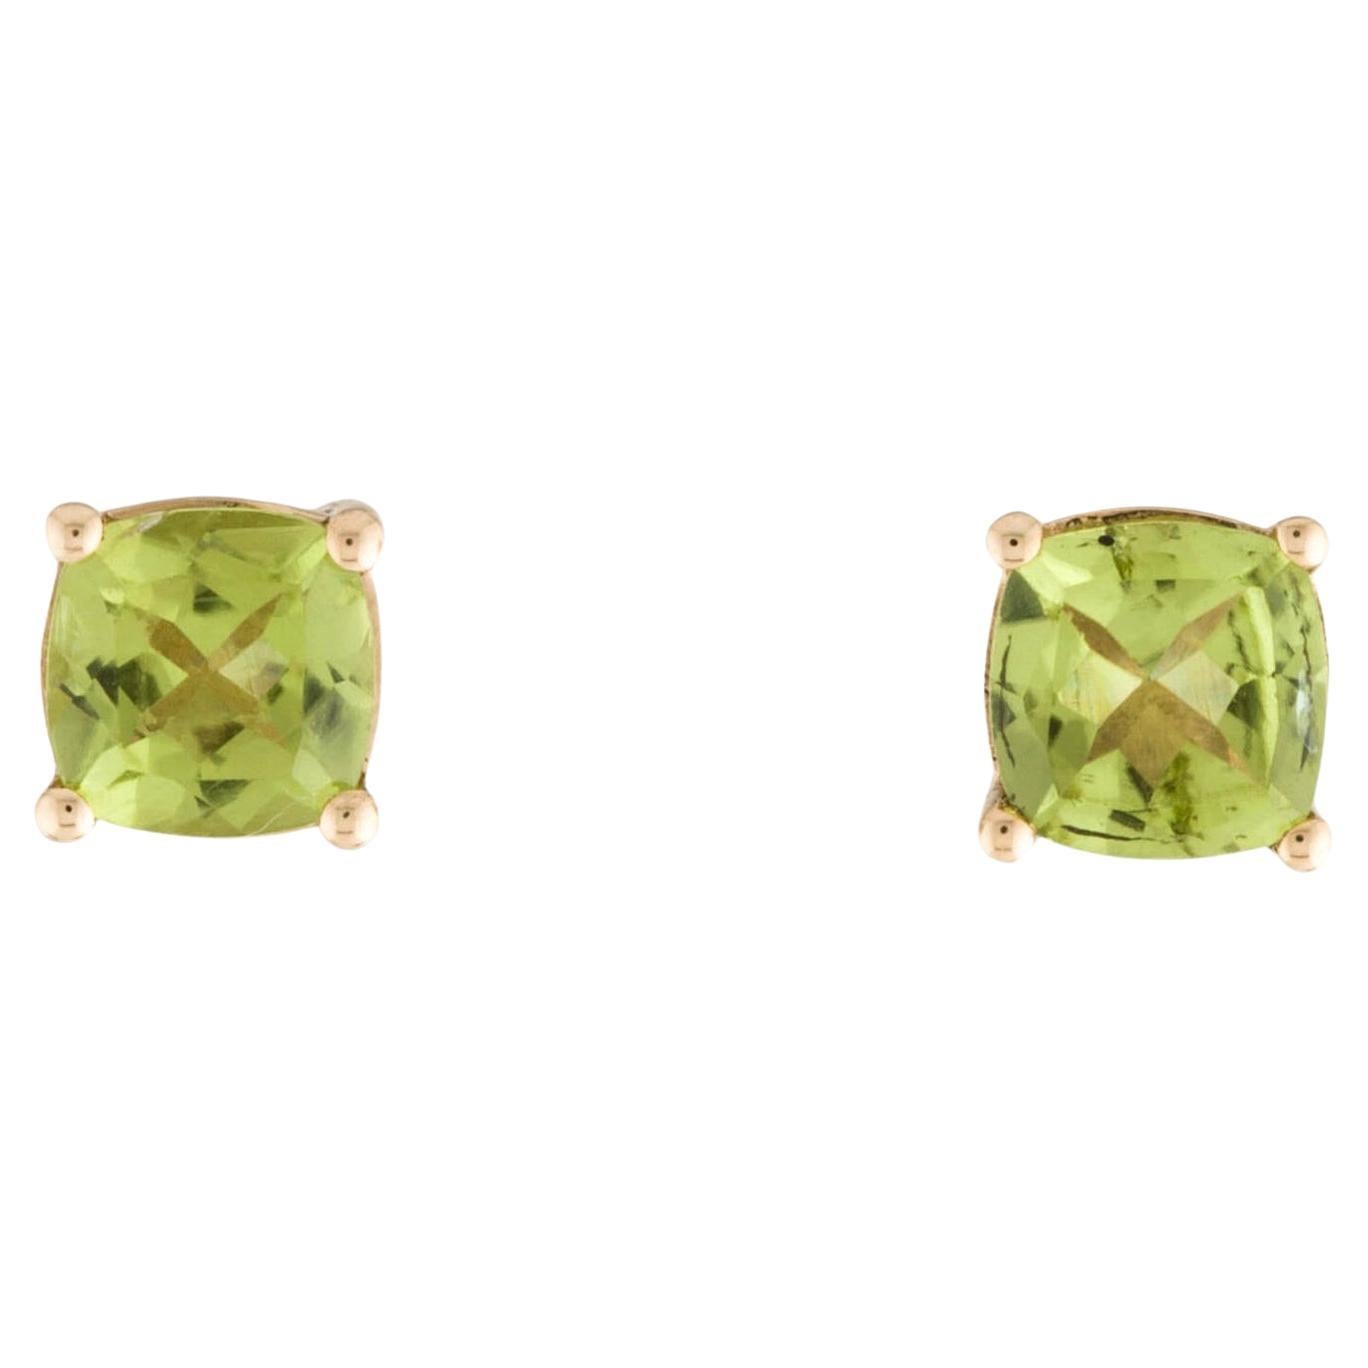 Chic 14K Peridot Stud Earrings - Timeless Gemstone Jewelry Collection For Sale